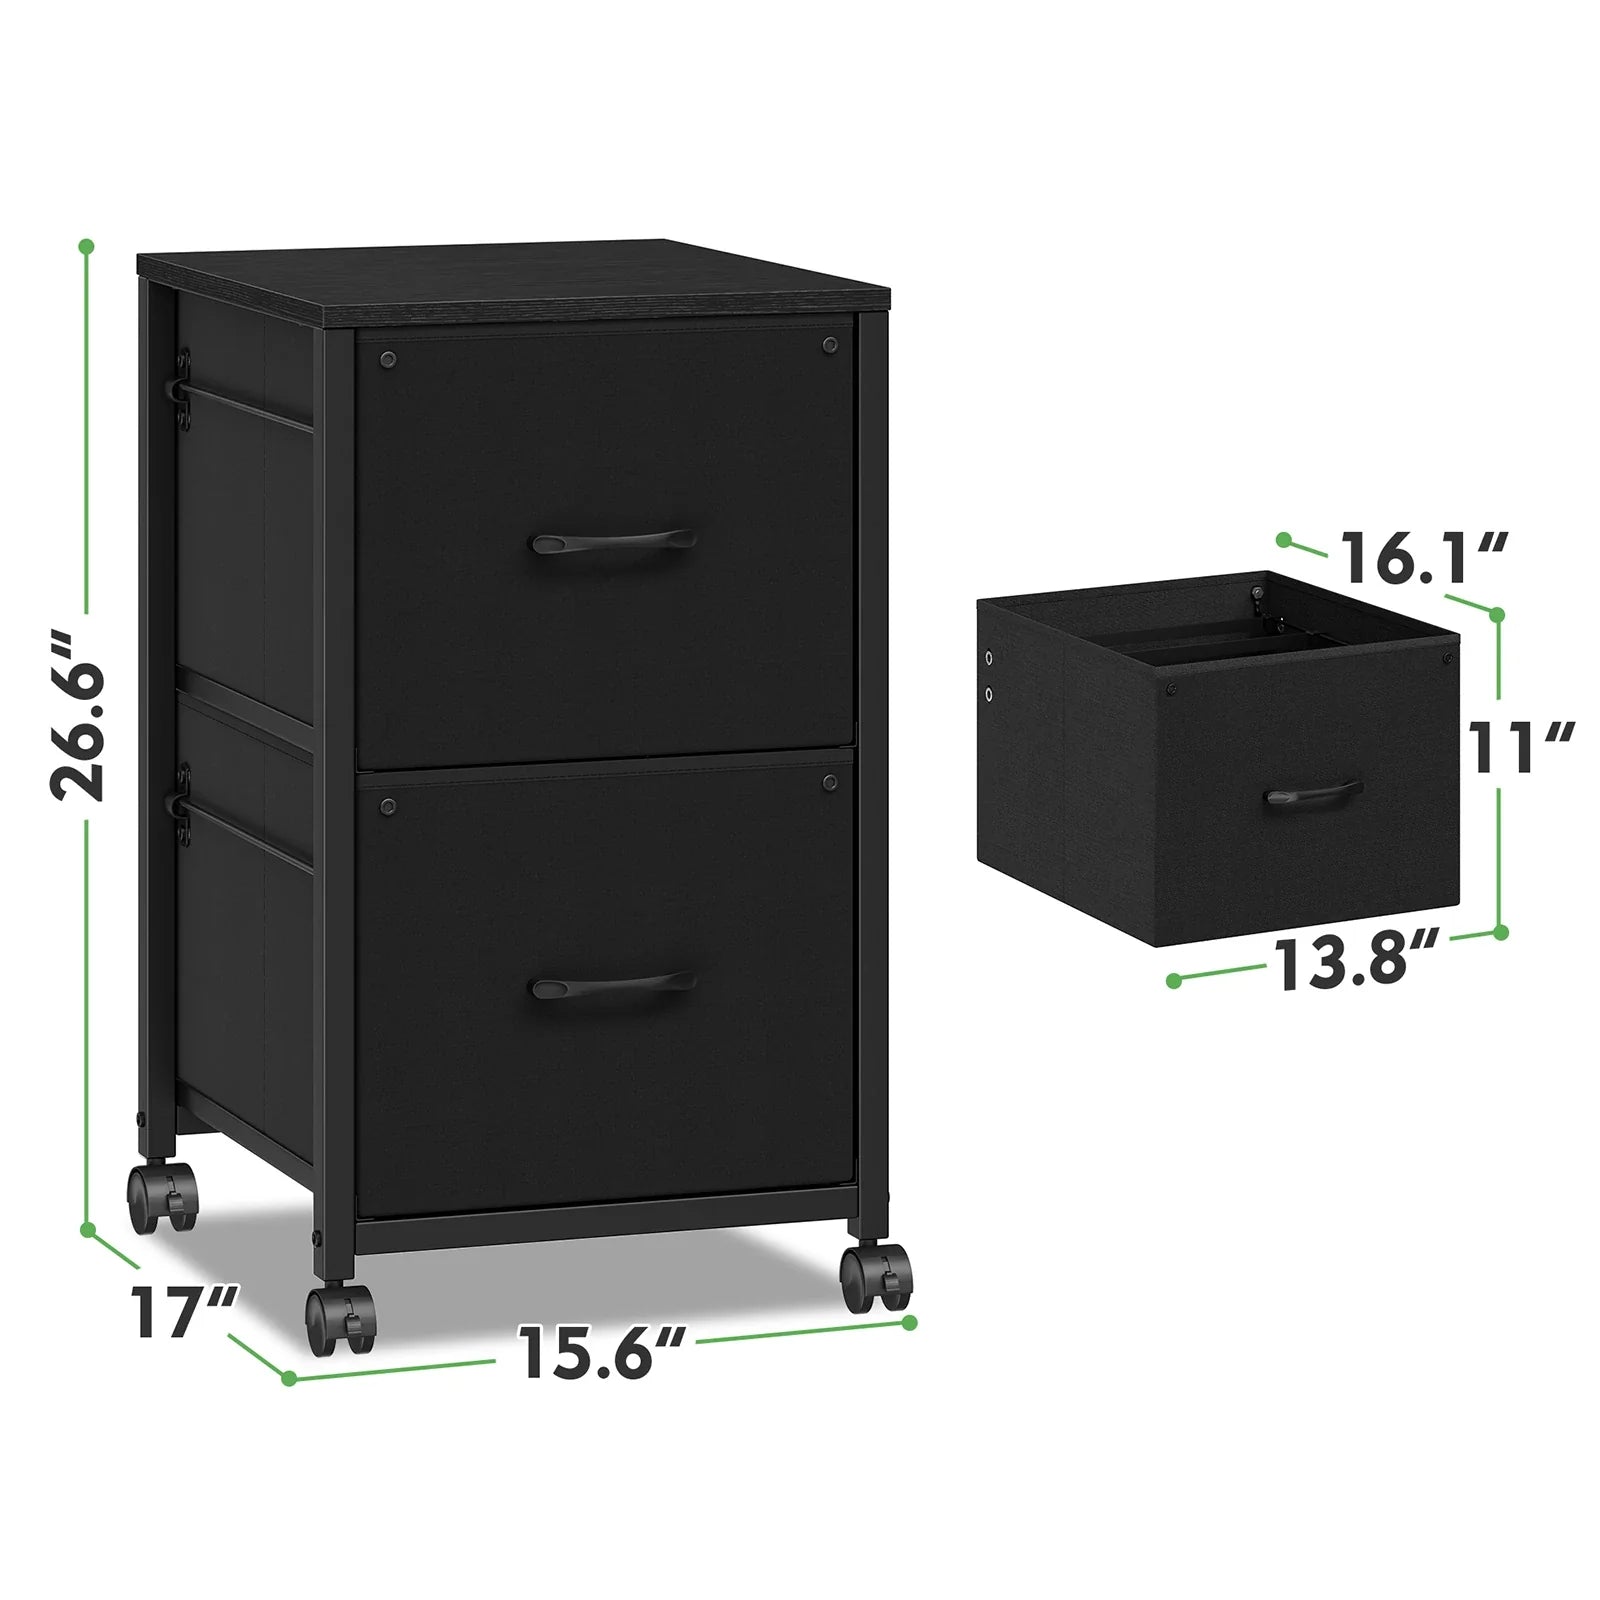 Raybee File Cabinet For Home Office Black With Wheels, Legal Size